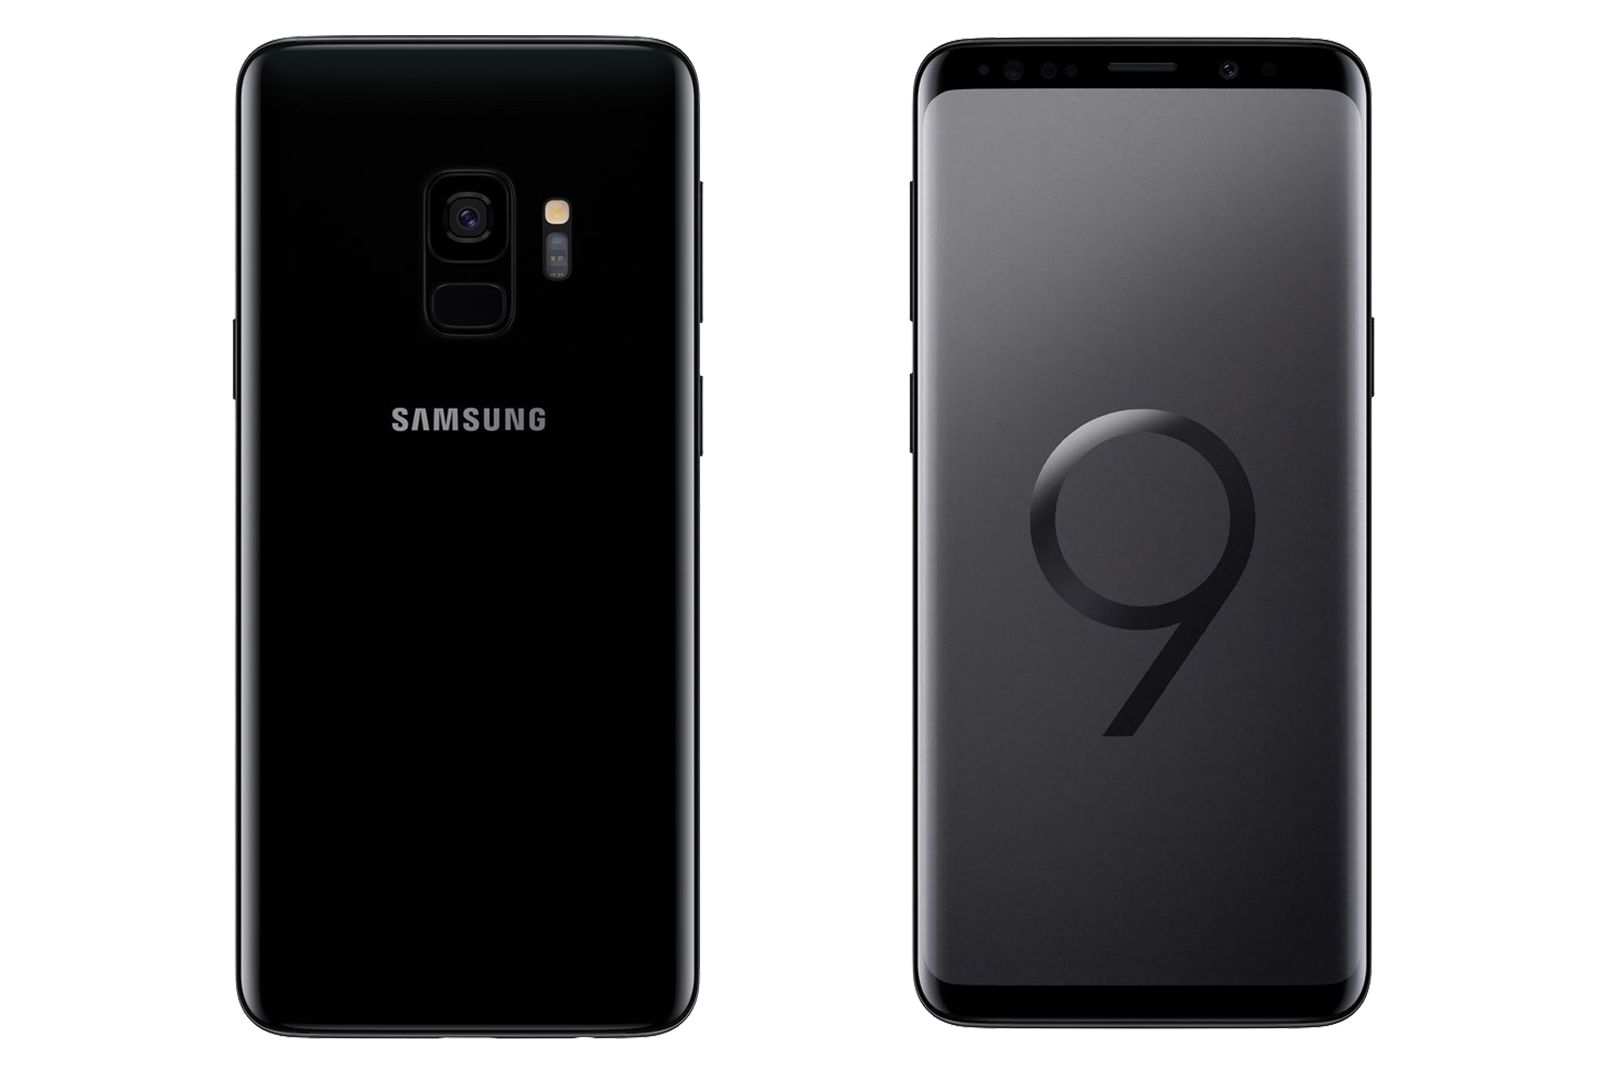 Full details and images of Samsung Galaxy S9 leak a week ahead of launch image 1